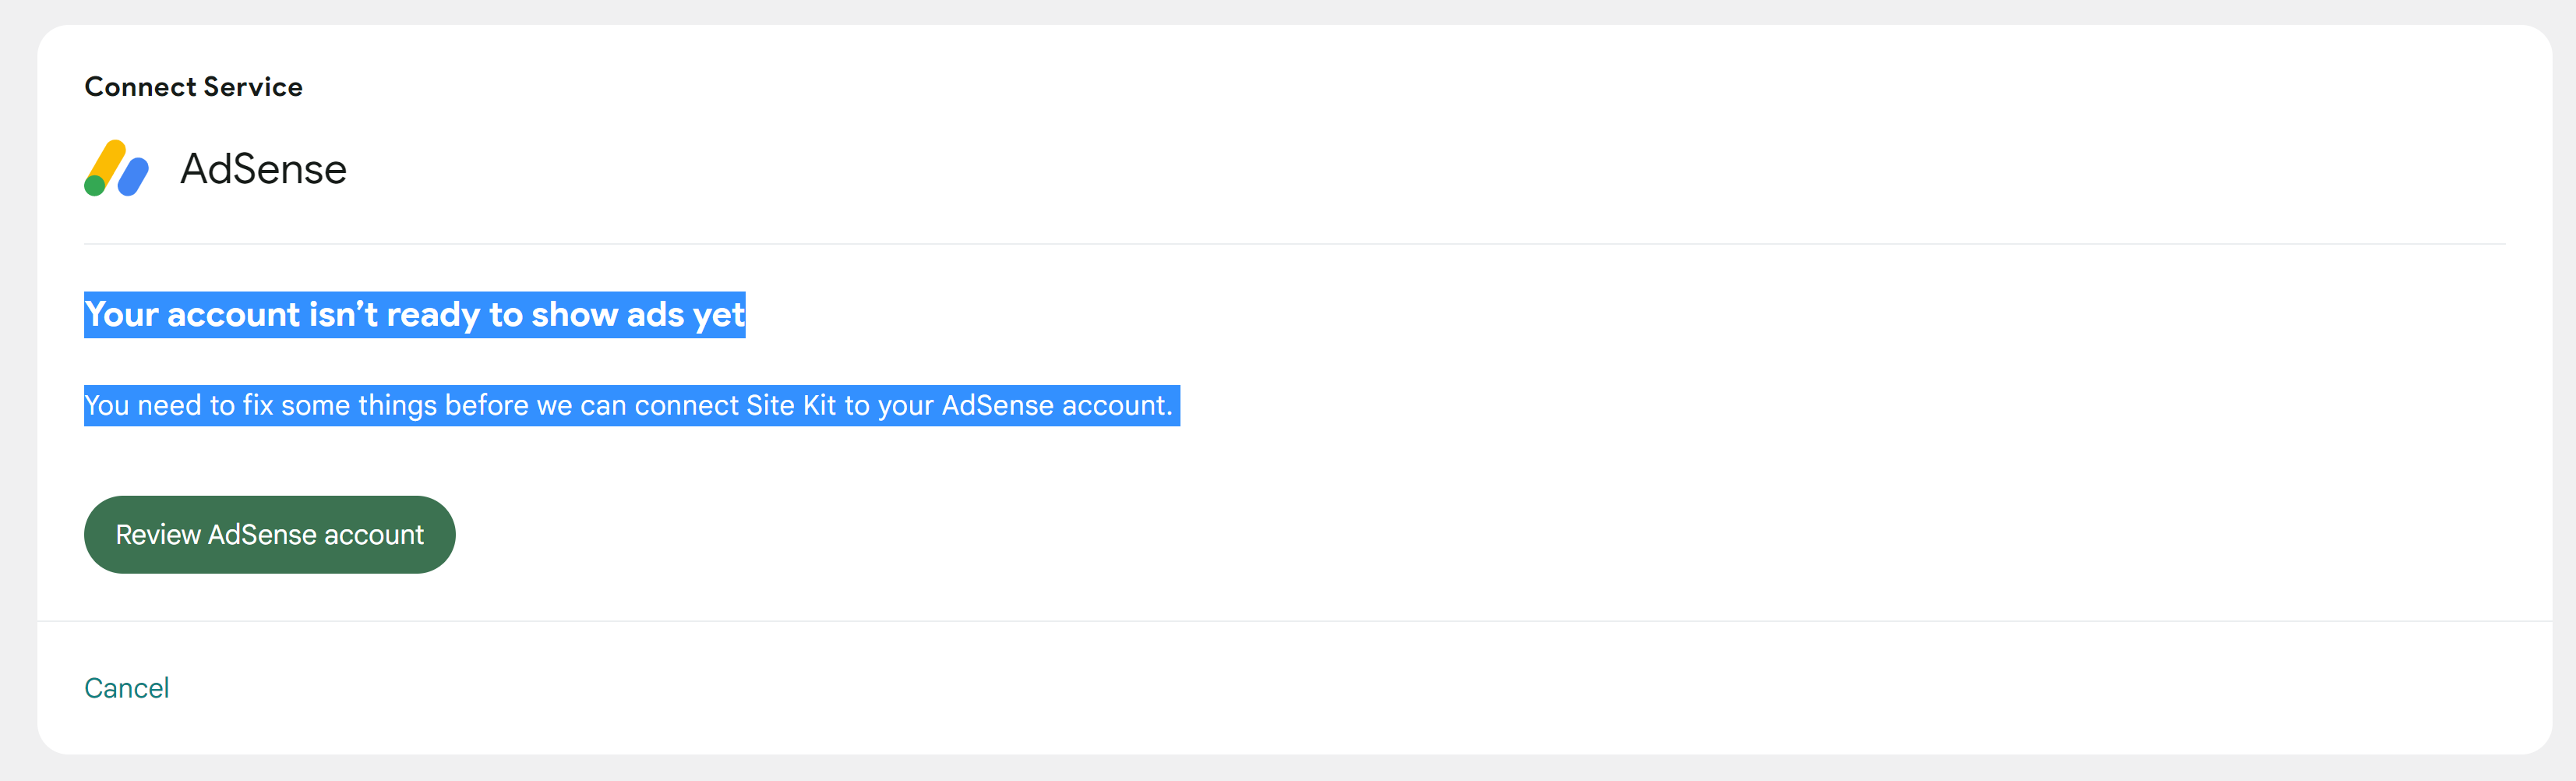 Adsense Account Review: Mastering Optimization for Success